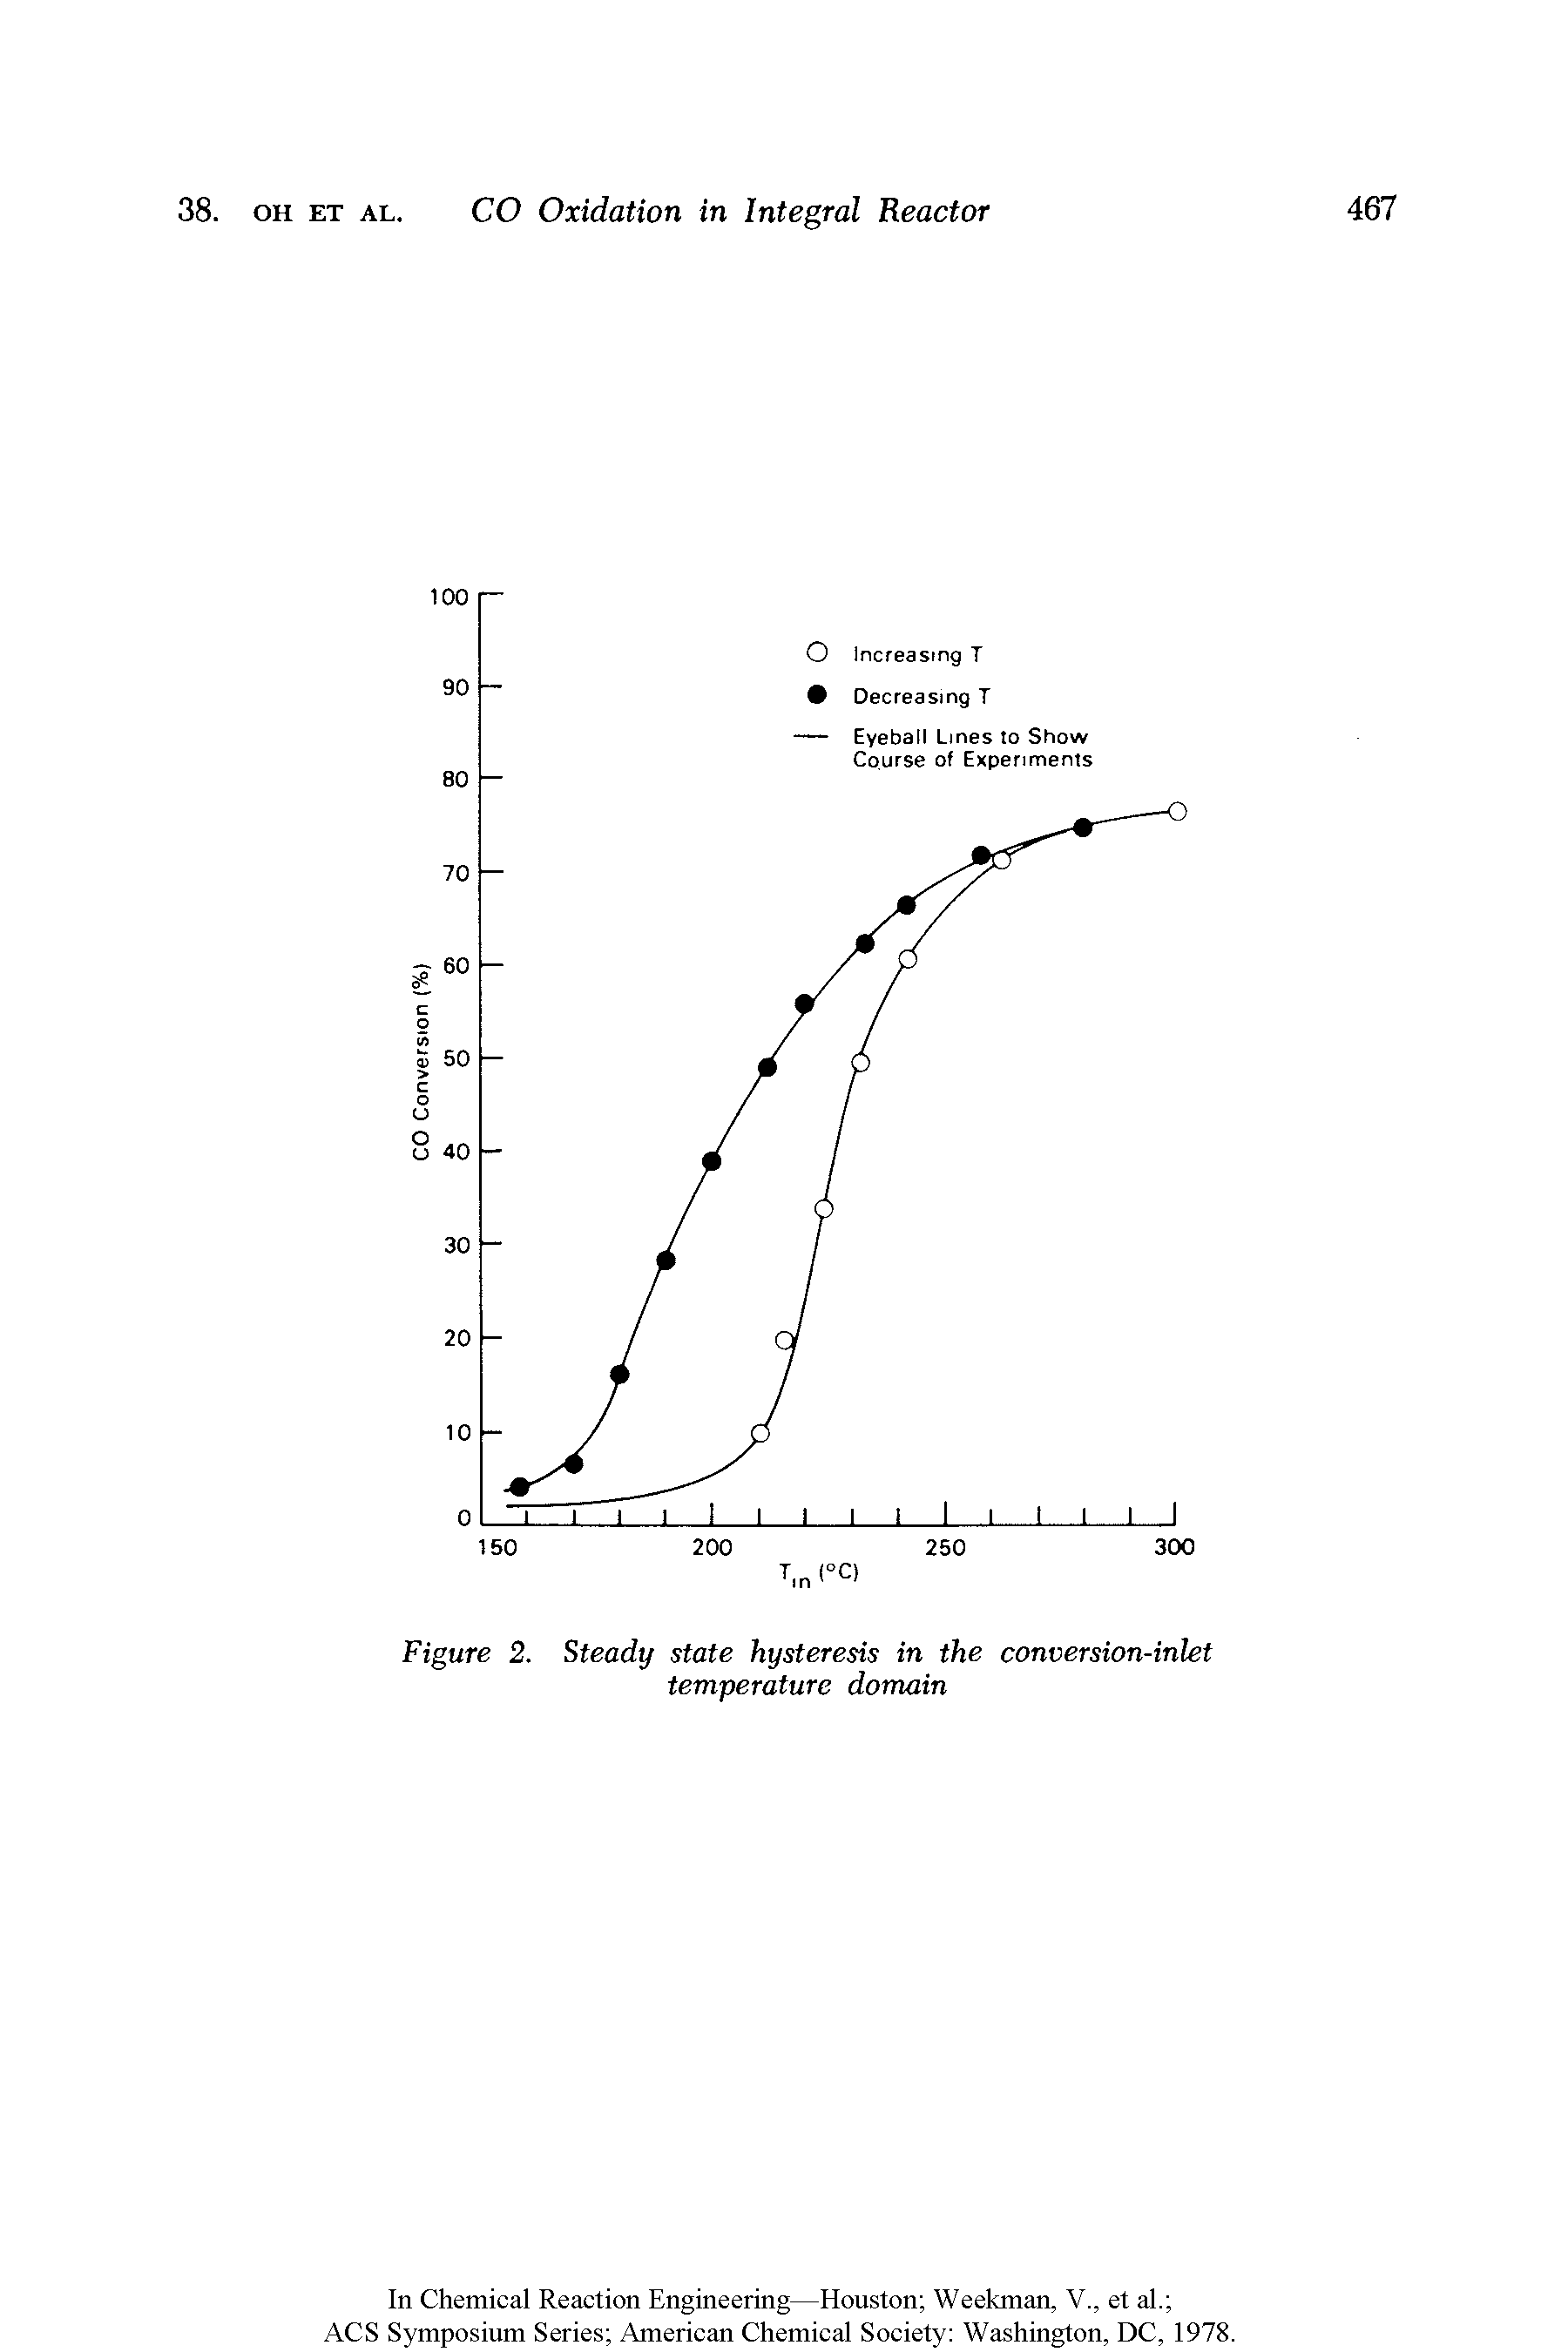 Figure 2. Steady state hysteresis in the conversion-inlet temperature domain...